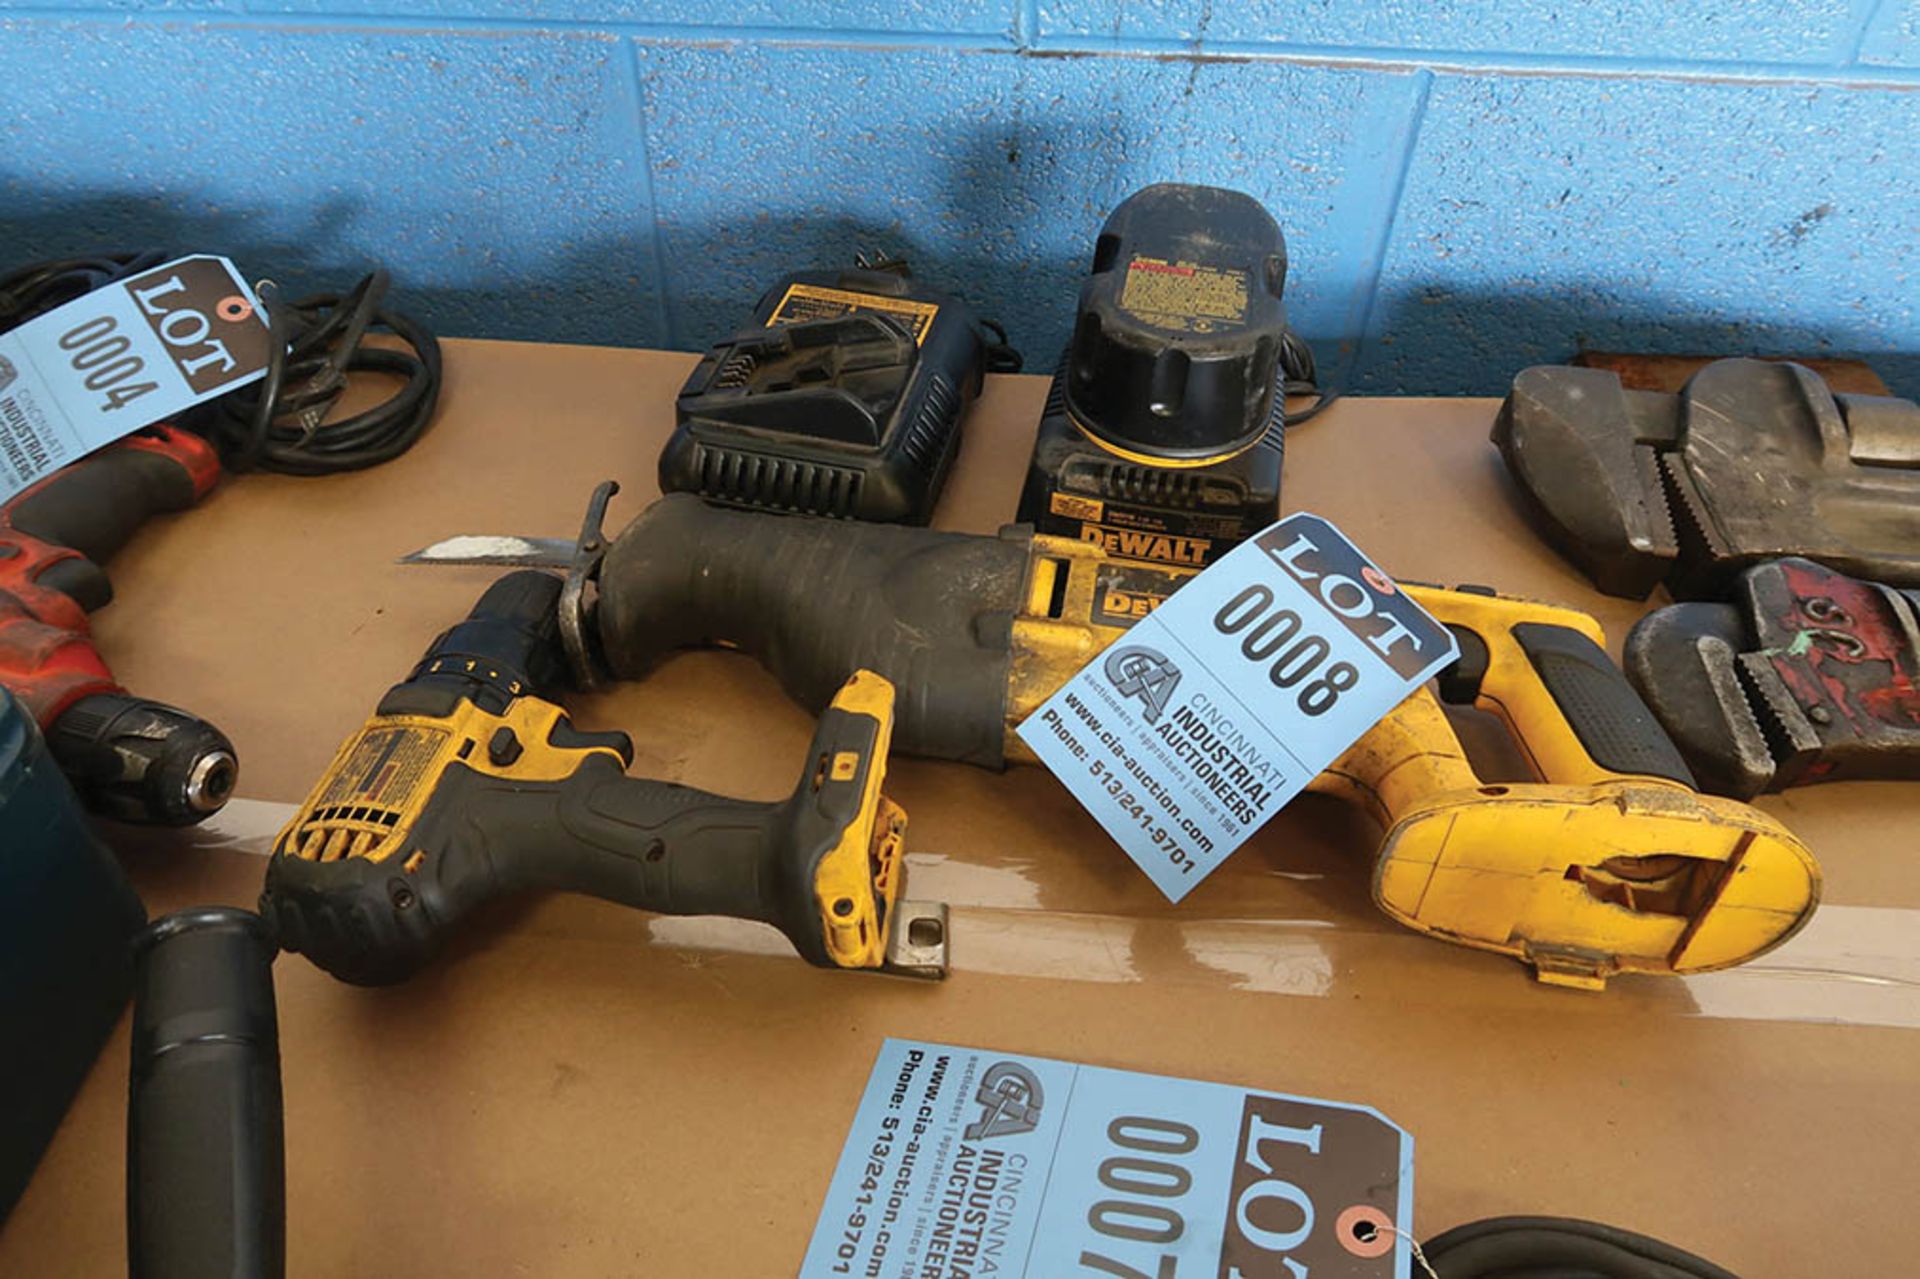 (LOT) DEWALT CORDLESS DRILL AND SAWZALL WITH CHARGERS